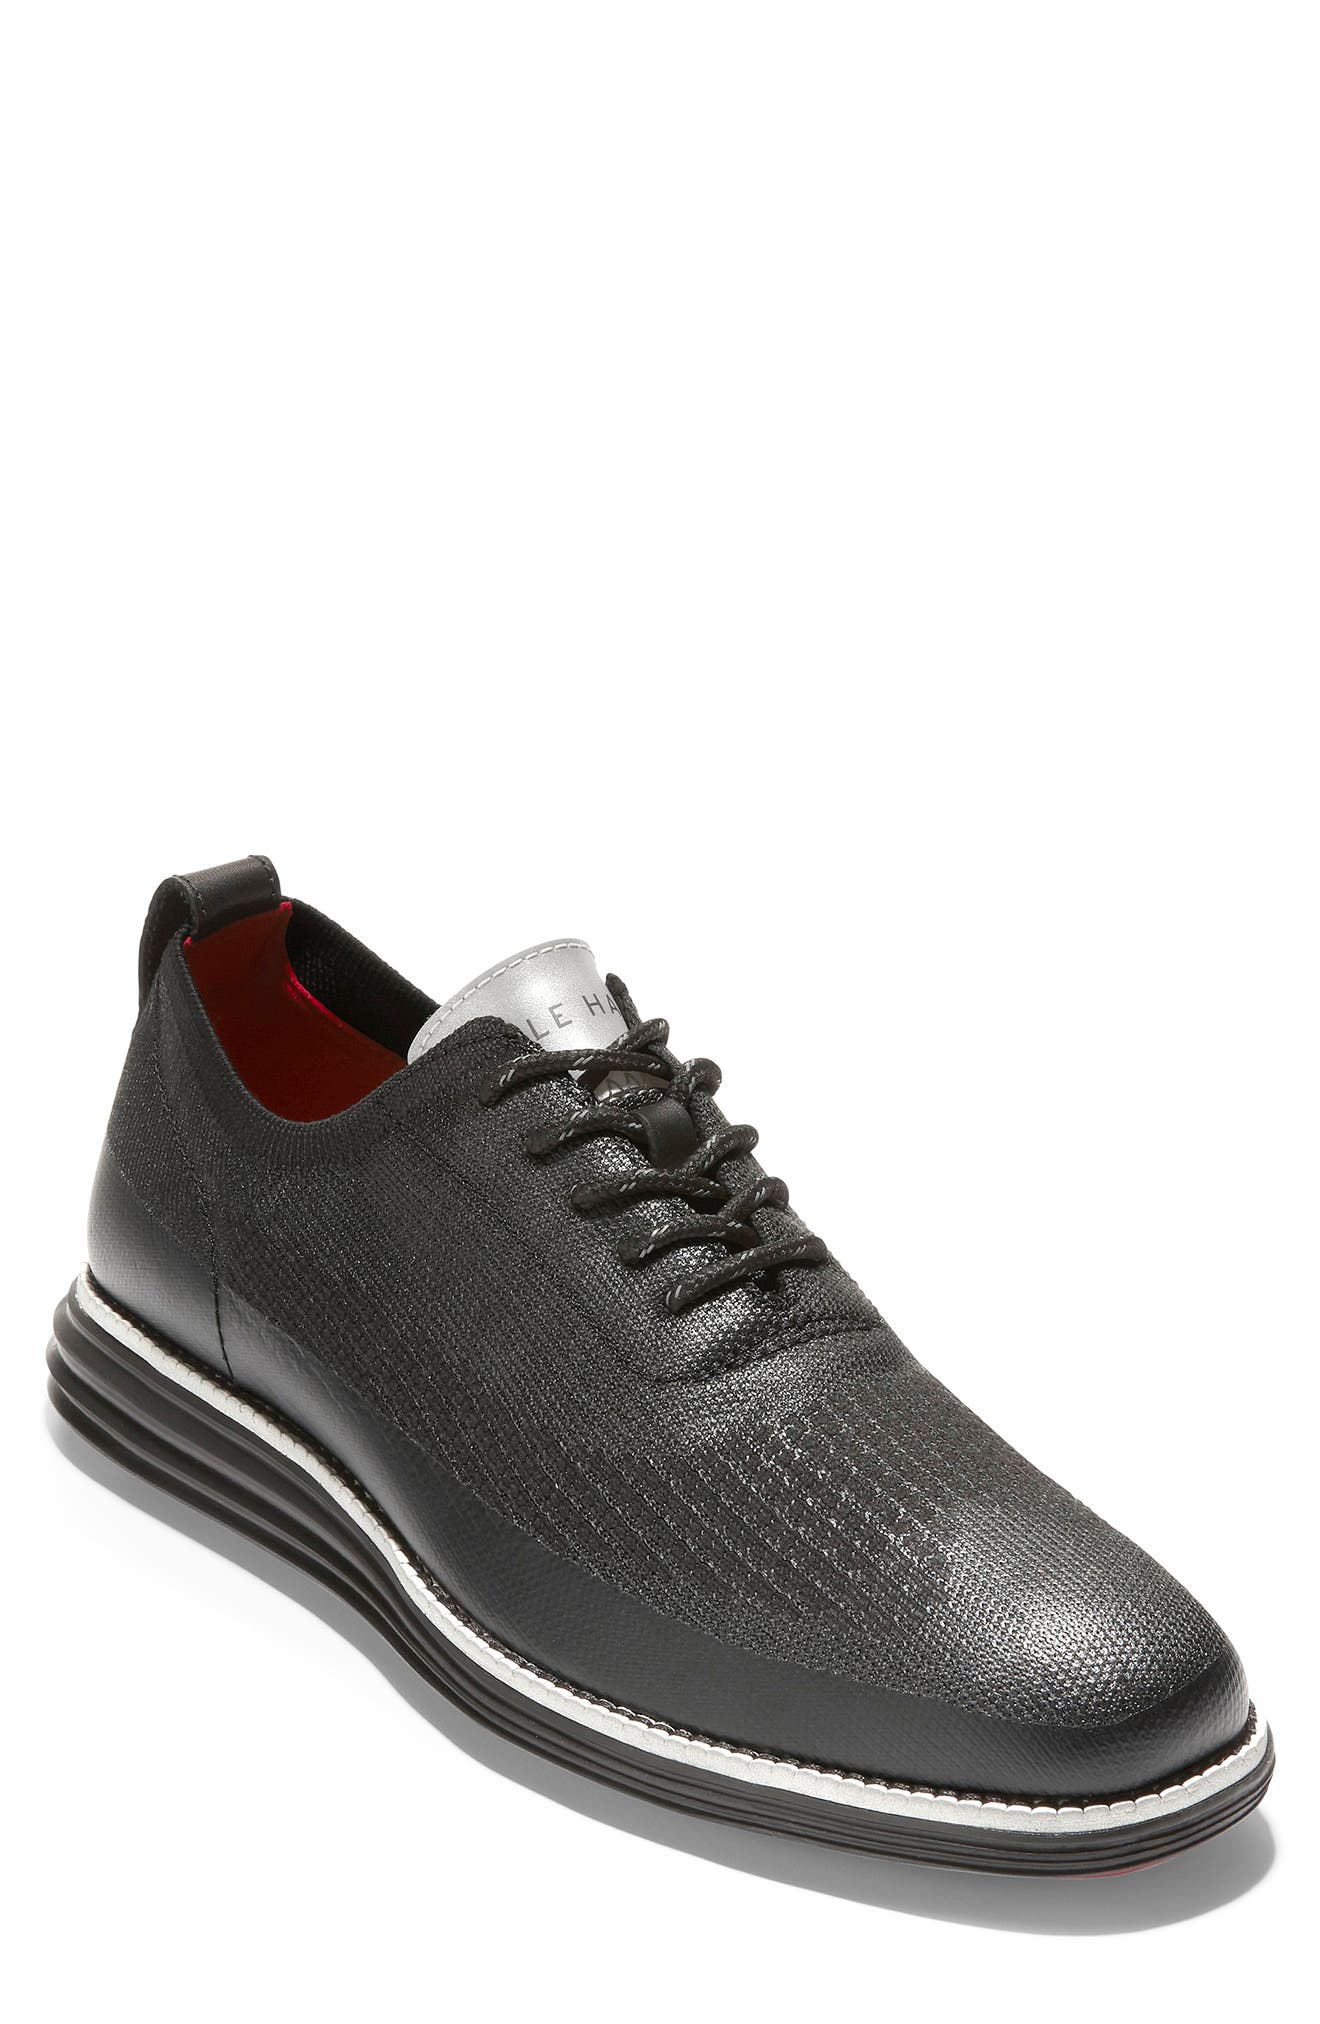 cole haan dress shoes with nike lunarlon bottoms